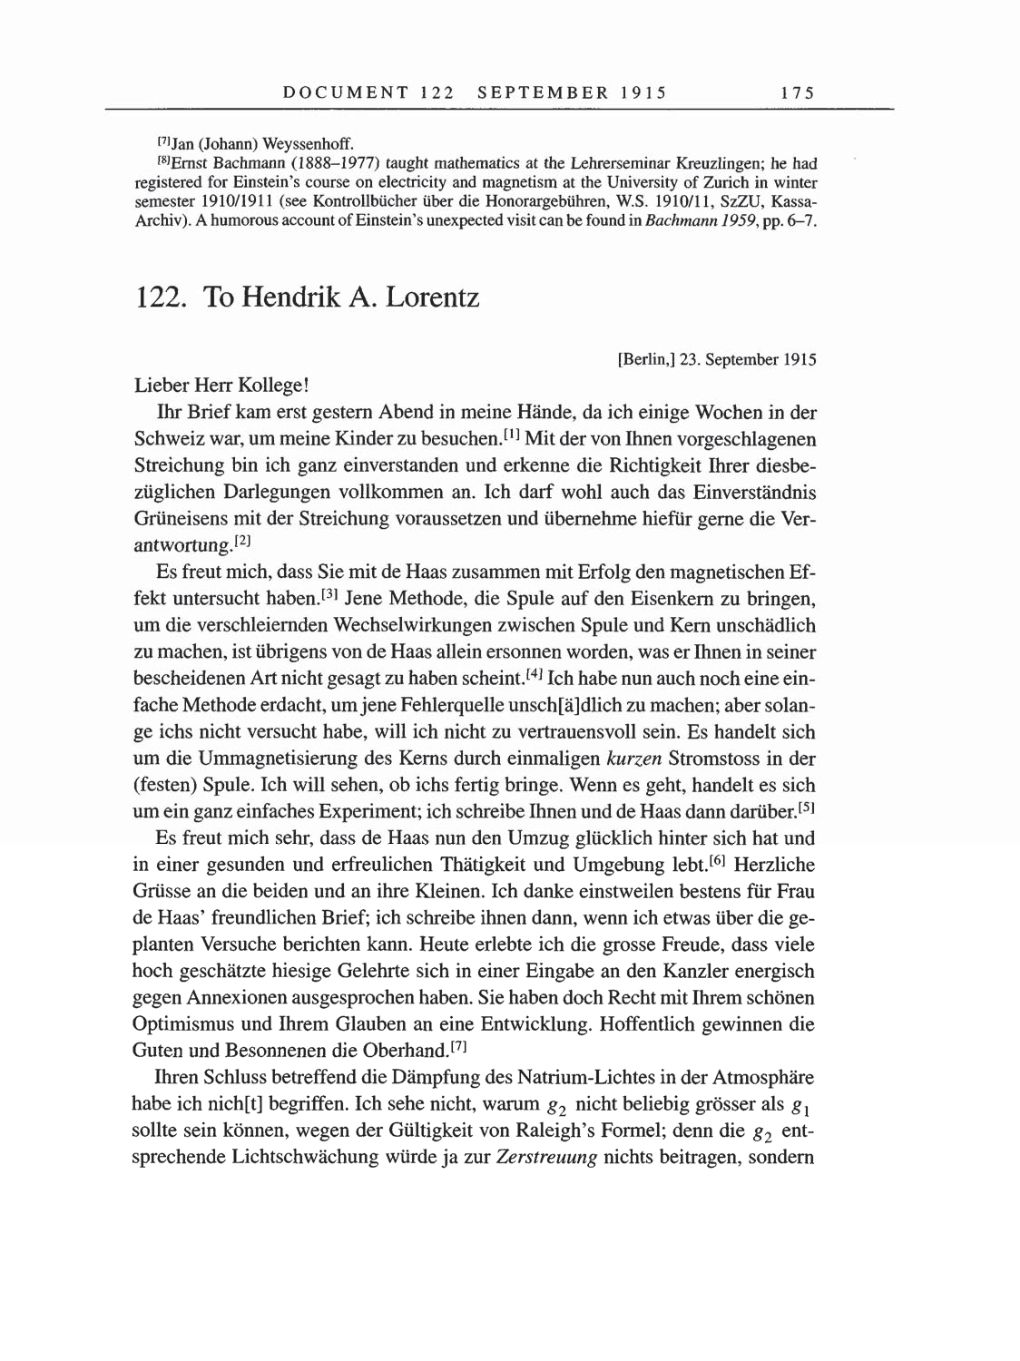 Volume 8, Part A: The Berlin Years: Correspondence 1914-1917 page 175